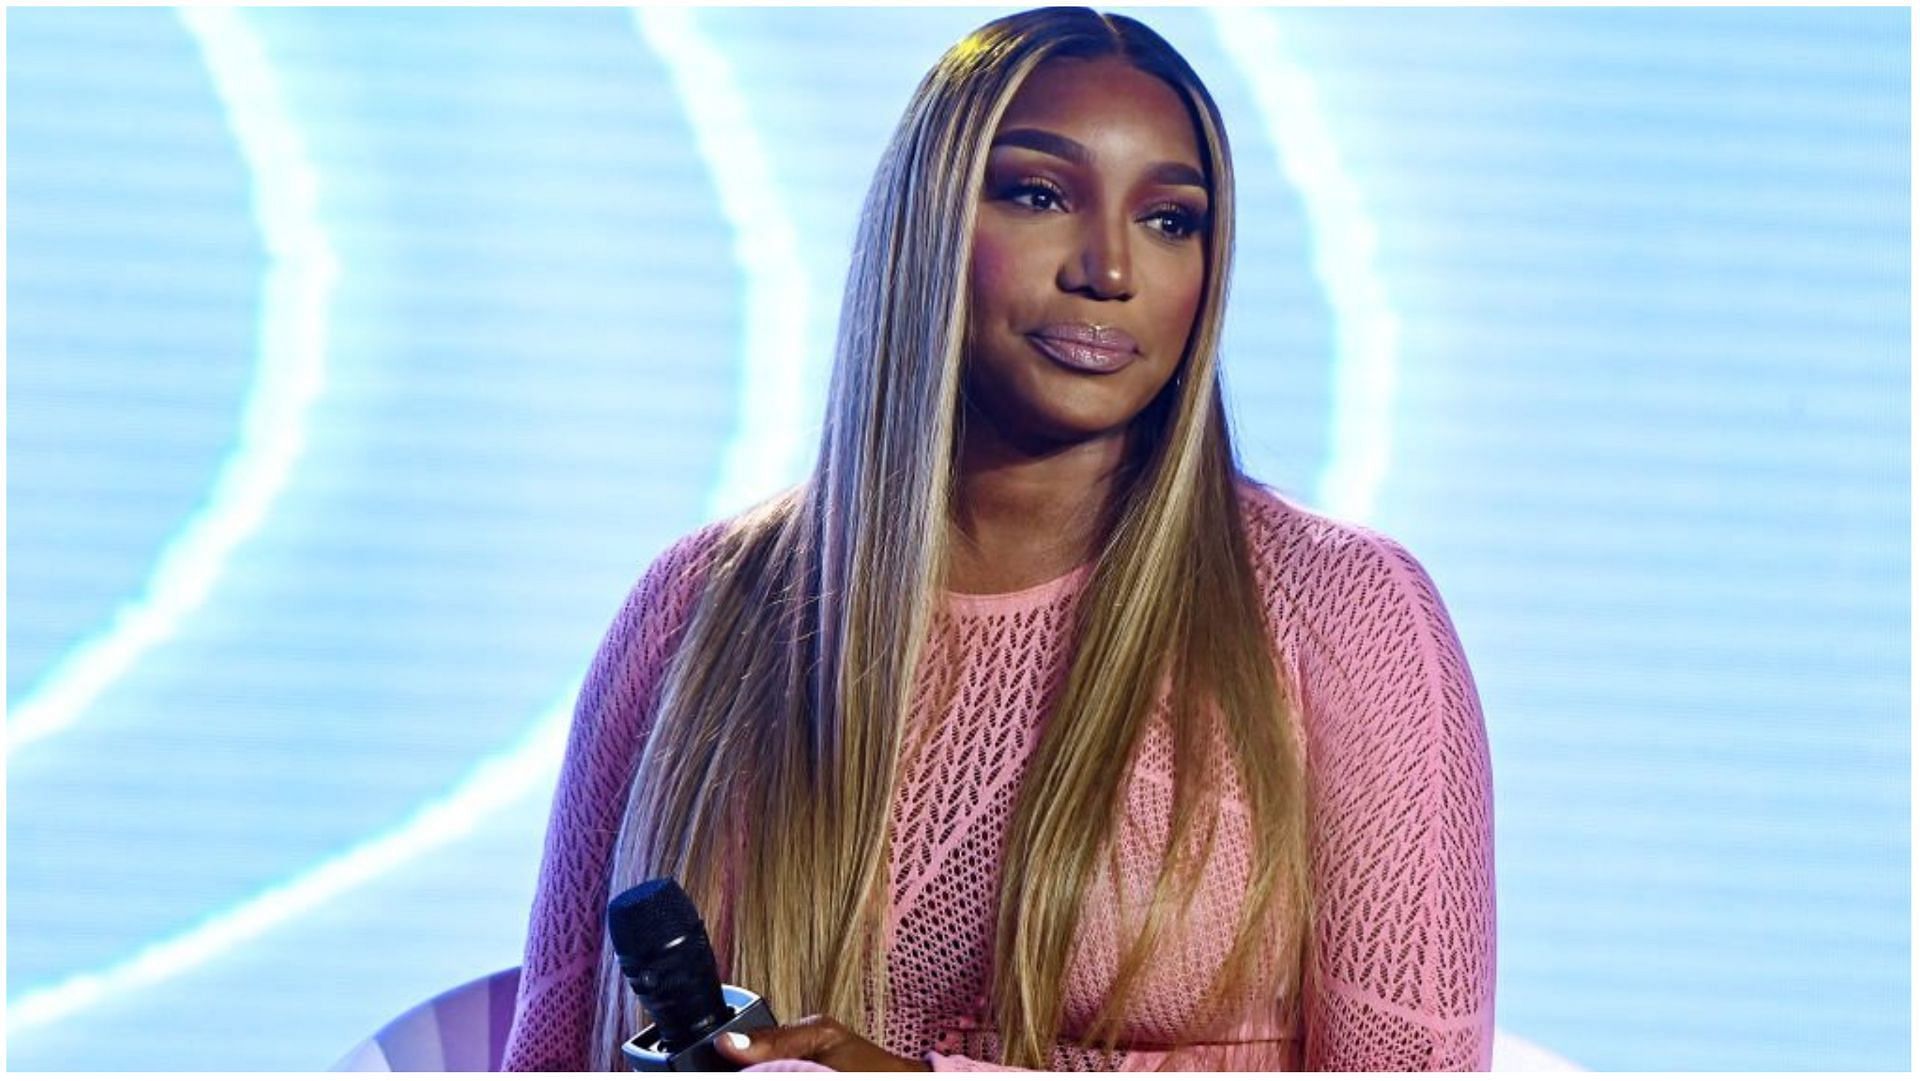 NeNe Leakes is mostly known for her appearances in The Real Housewives of Atlanta. (Image via Paras Griffin/Getty Images)